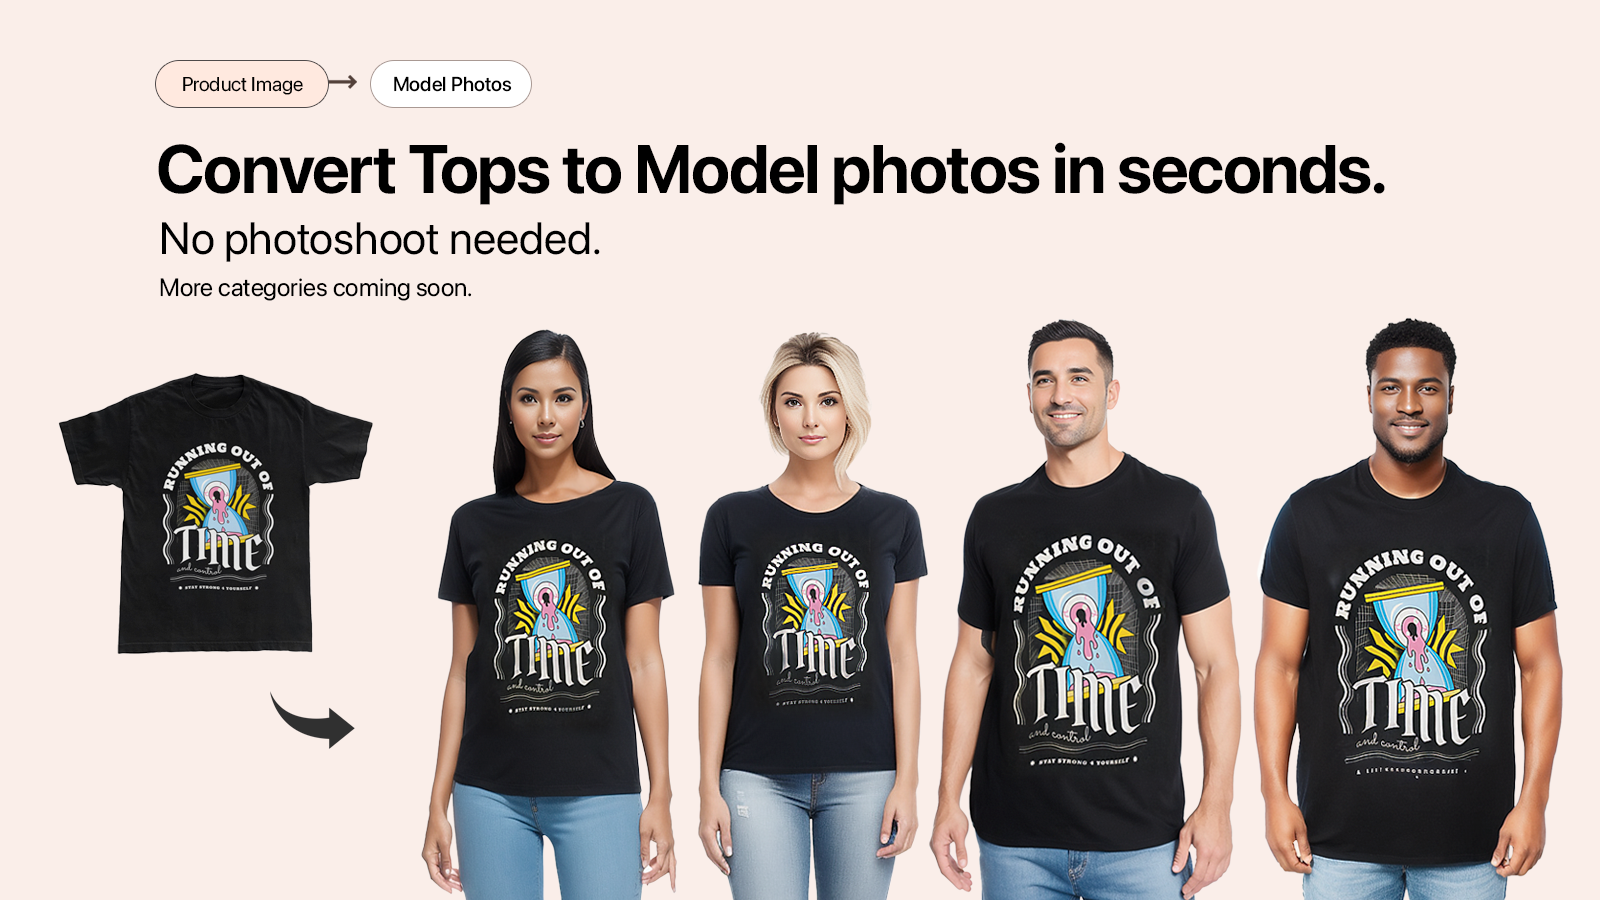 Convert tshirt images to model photos automatically